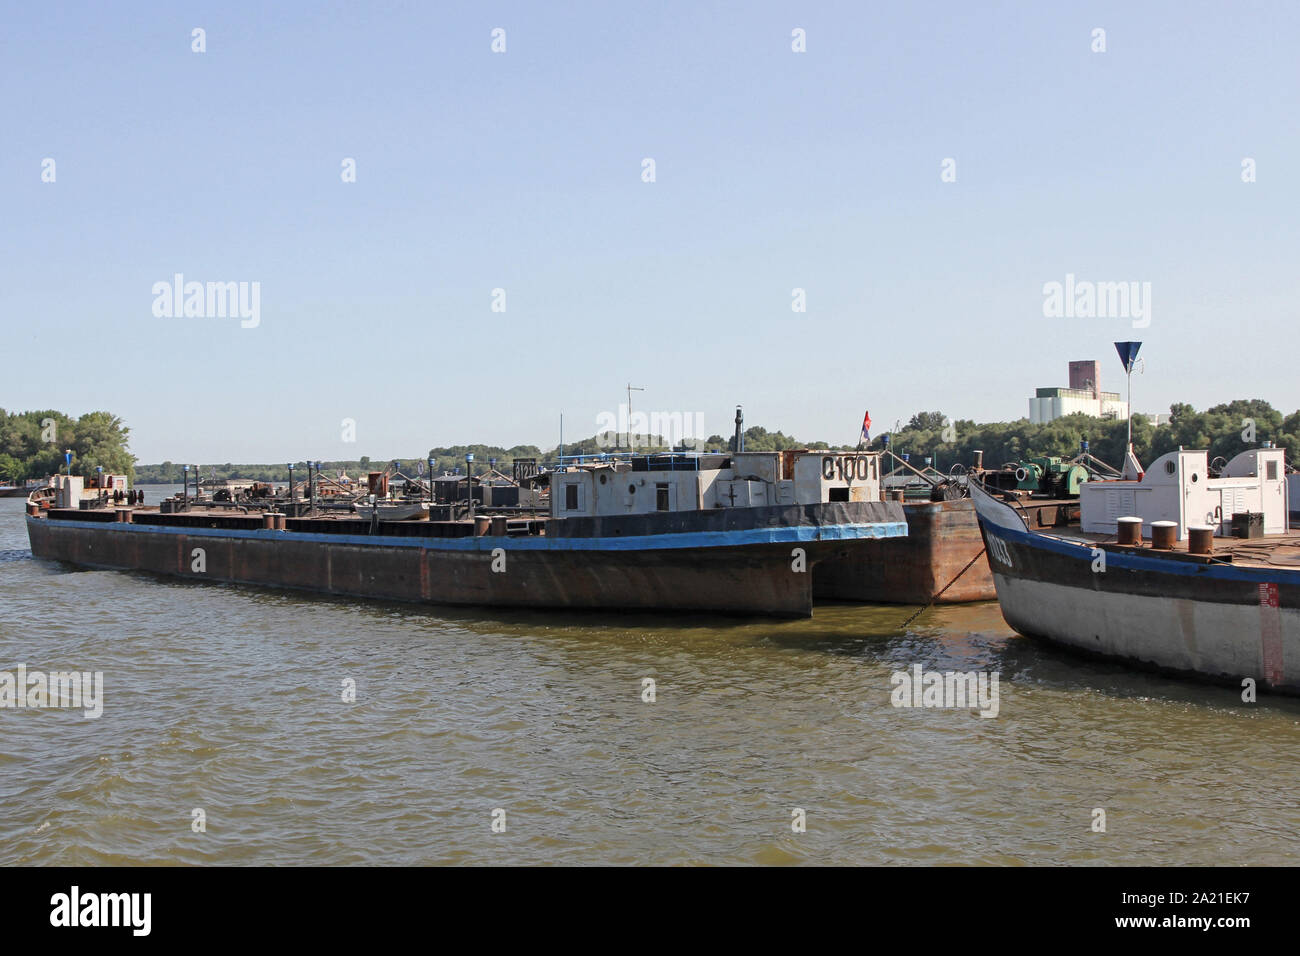 View of tankers on the Danube River near Belgrade, Serbia. Stock Photo